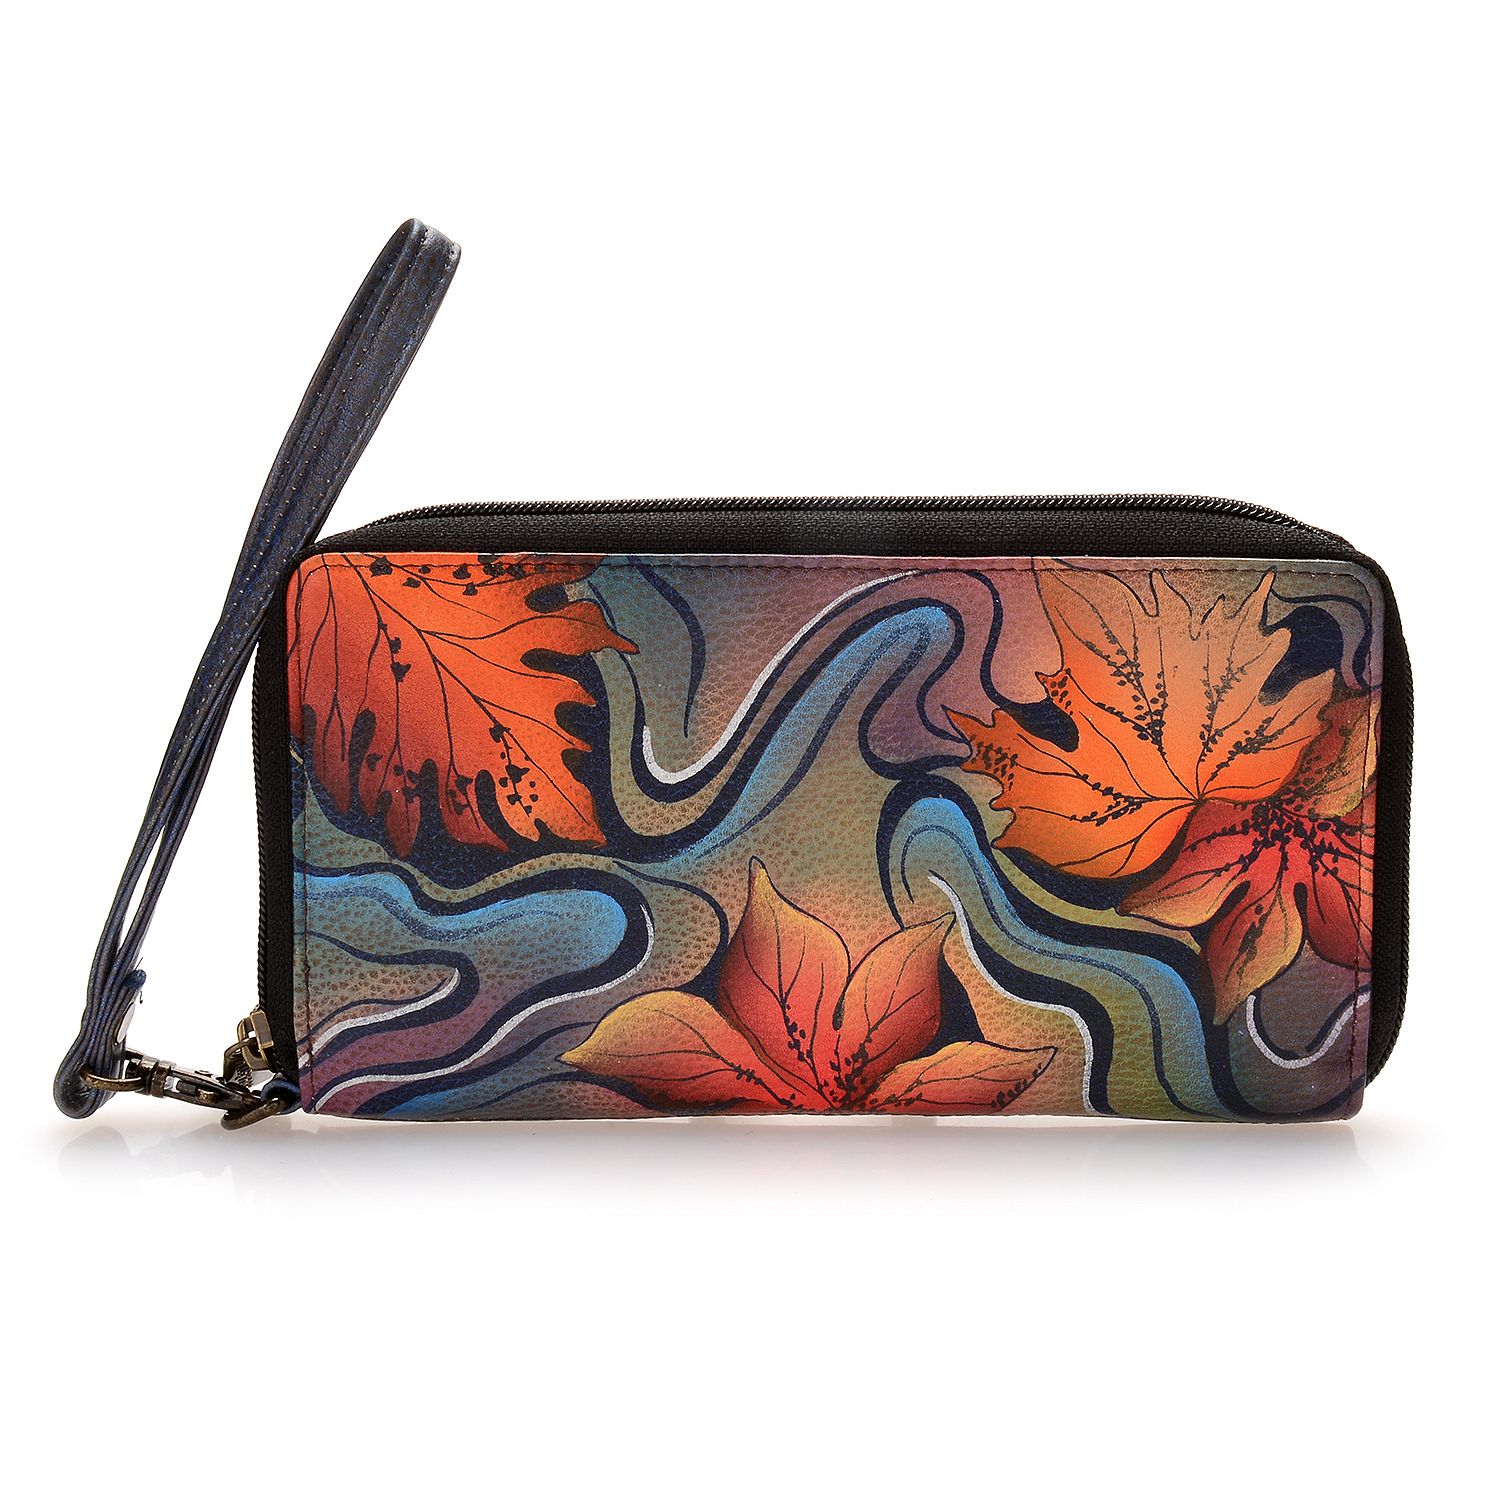 721-927- Anuschka Hand-Painted Leather Zip Around Wallet w/ Removable Strap